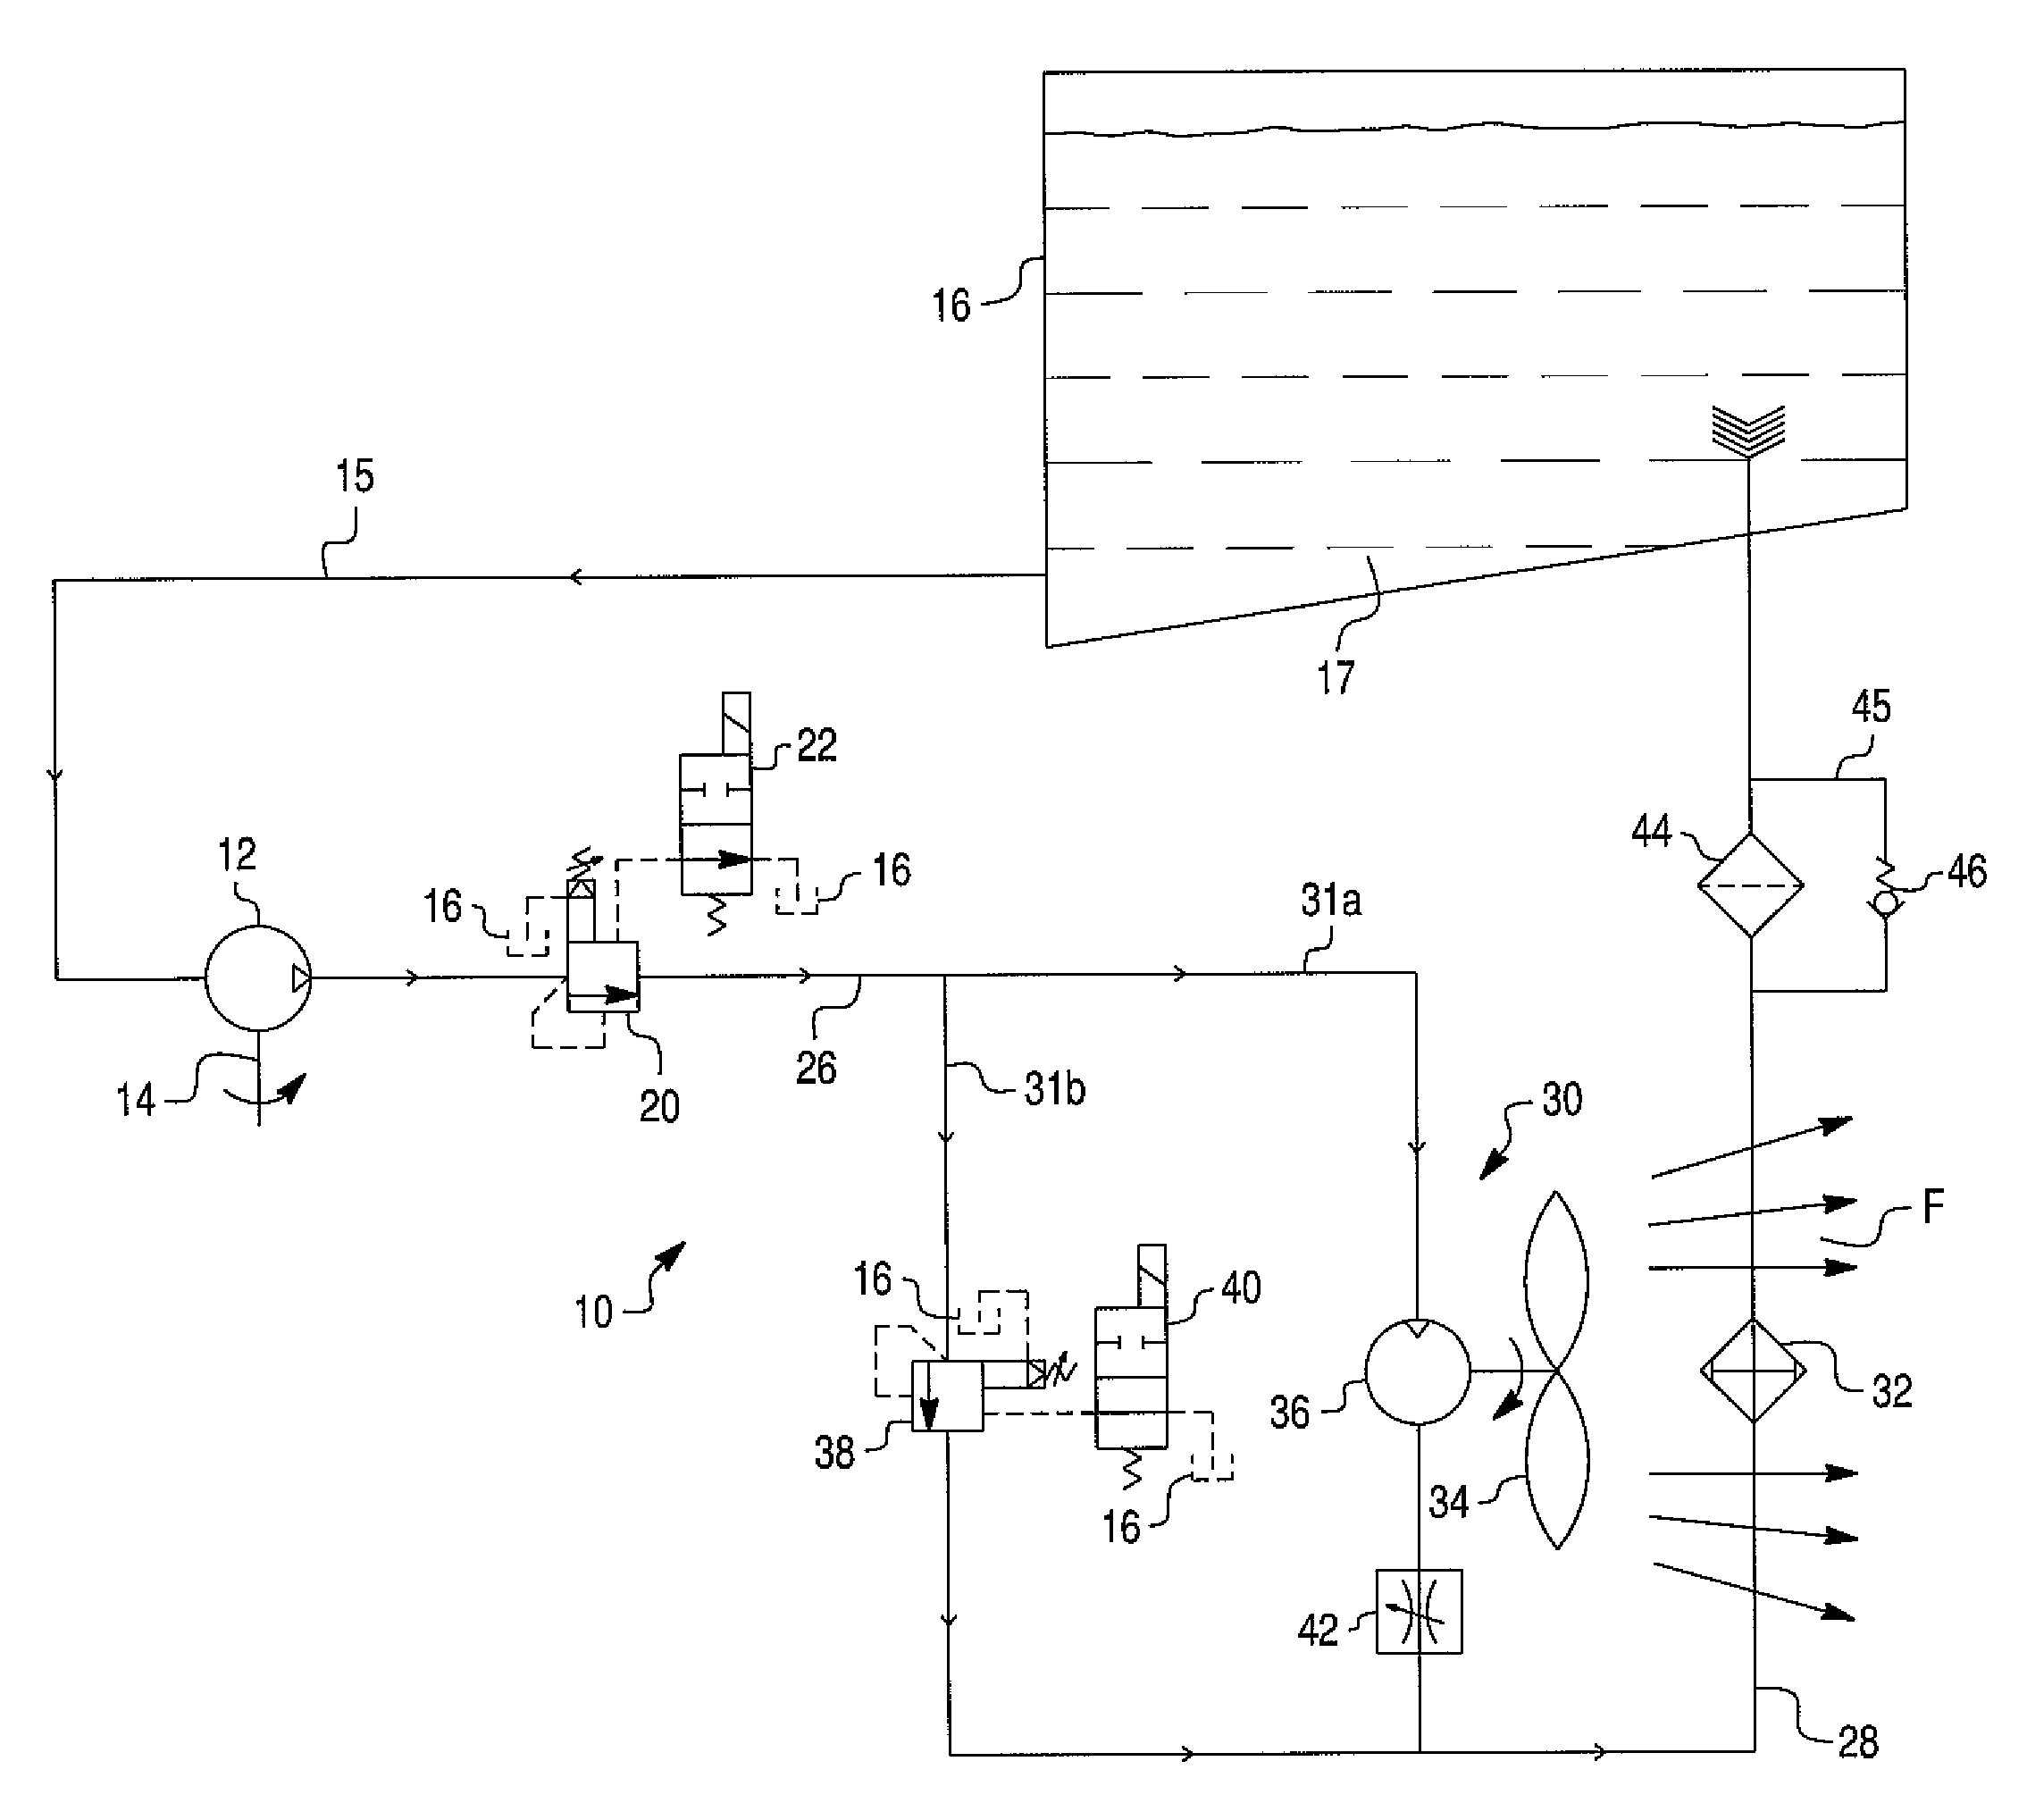 Energy conversion and dissipation system